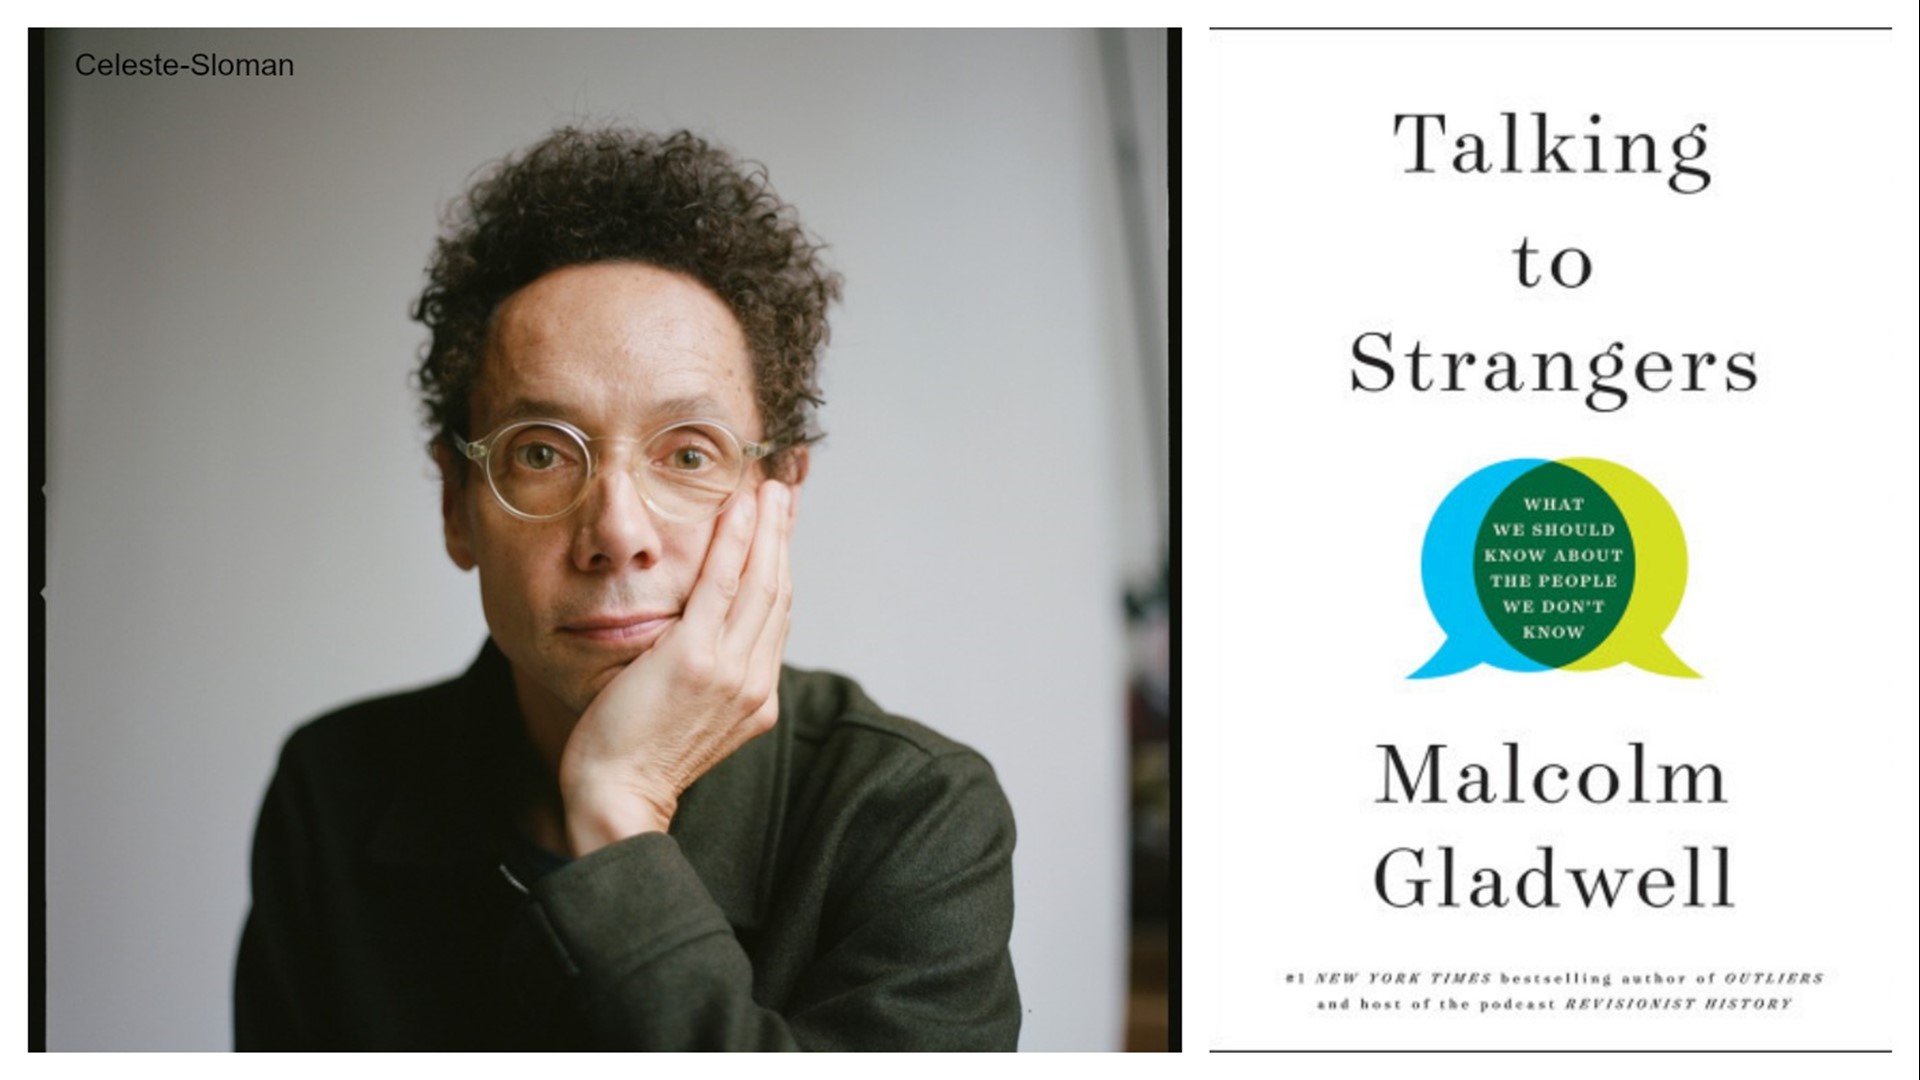 "Talking to Strangers" is his 6th book and warns readers that seemingly small conflict can have global impact